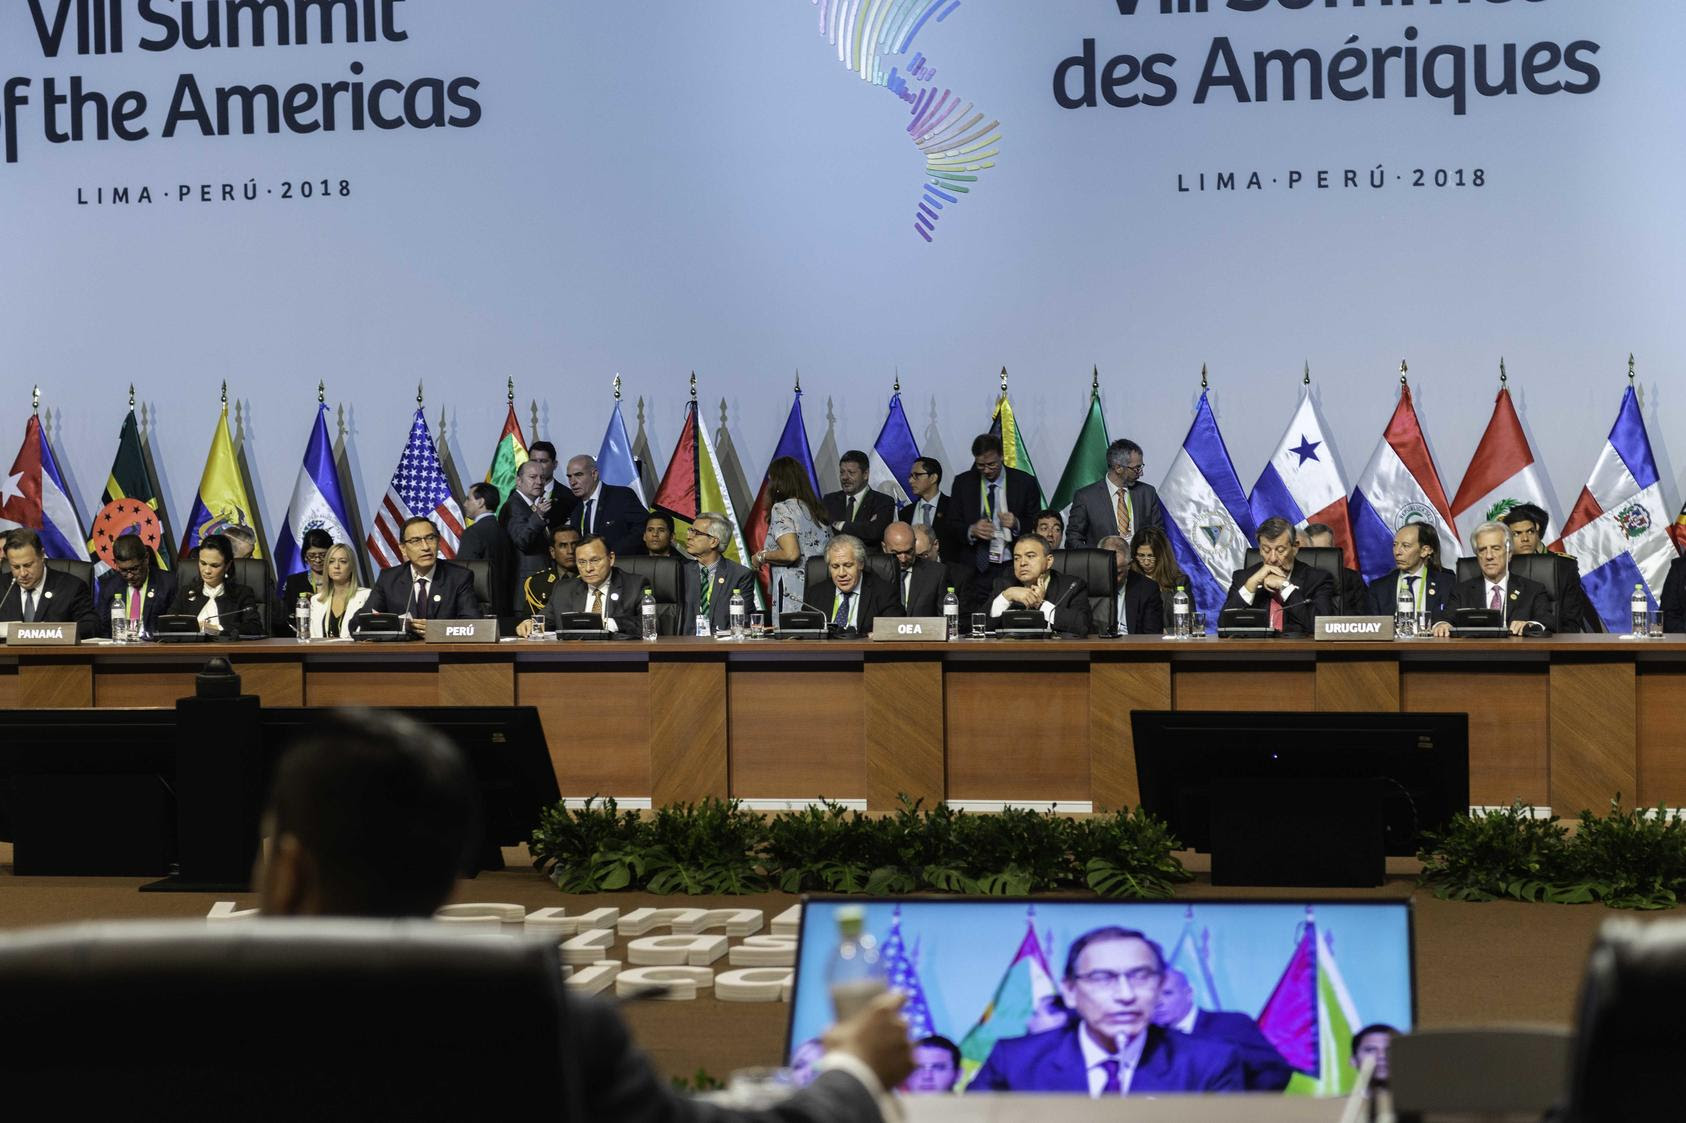 A plenary session of the 2018 Summit of the Americas in Lima, Peru. (Juan Manuel Herrera/Organization of American States)